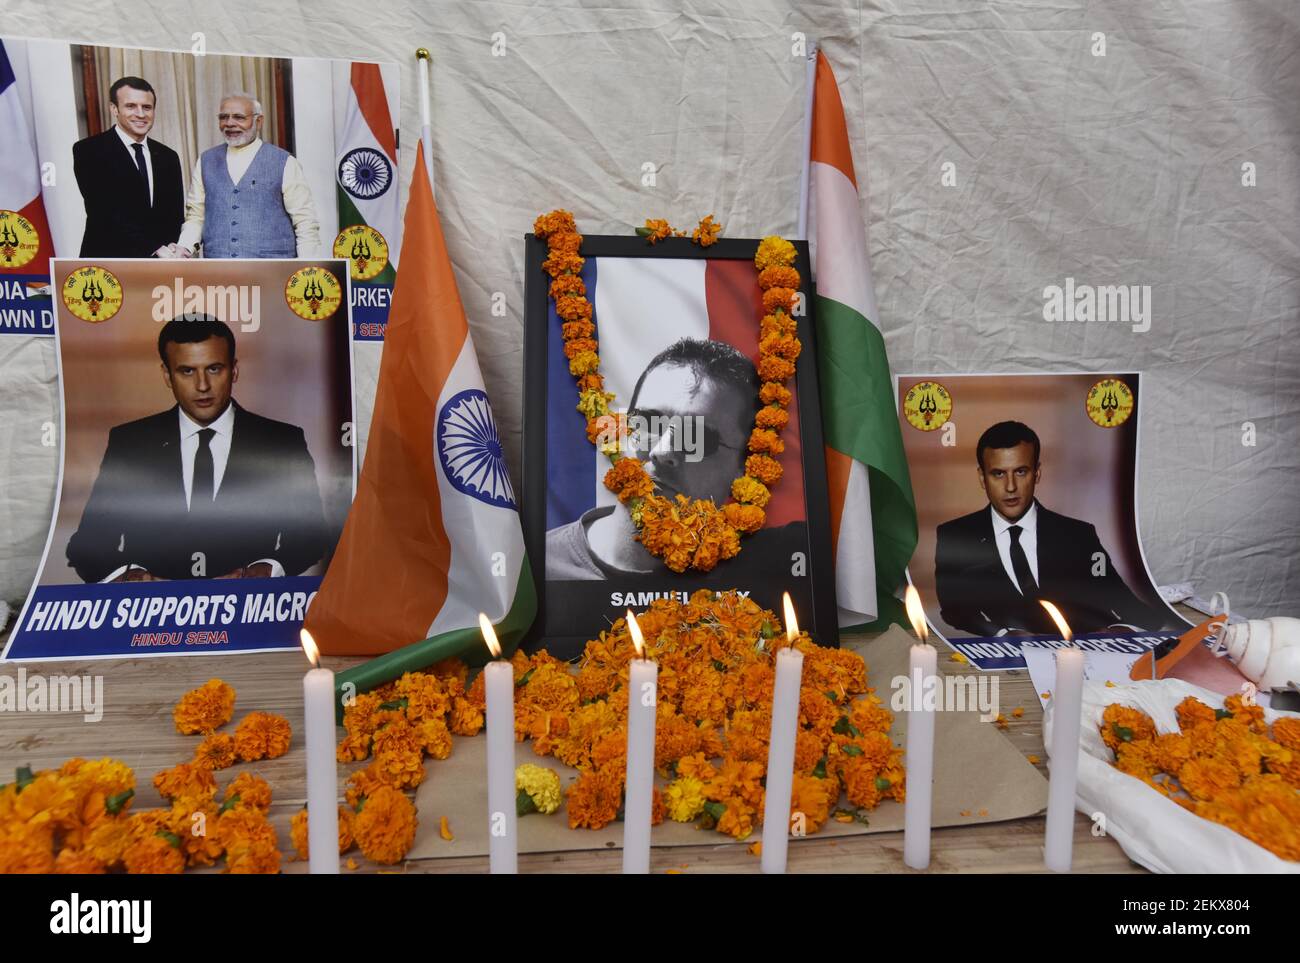 NEW DELHI, INDIA - OCTOBER 30: Photos of French President Emmanuel Macroon,  French teacher Samuel Paty who was beheaded for showing a cartoon of  Prophet Muhammad in his class, during a condolence